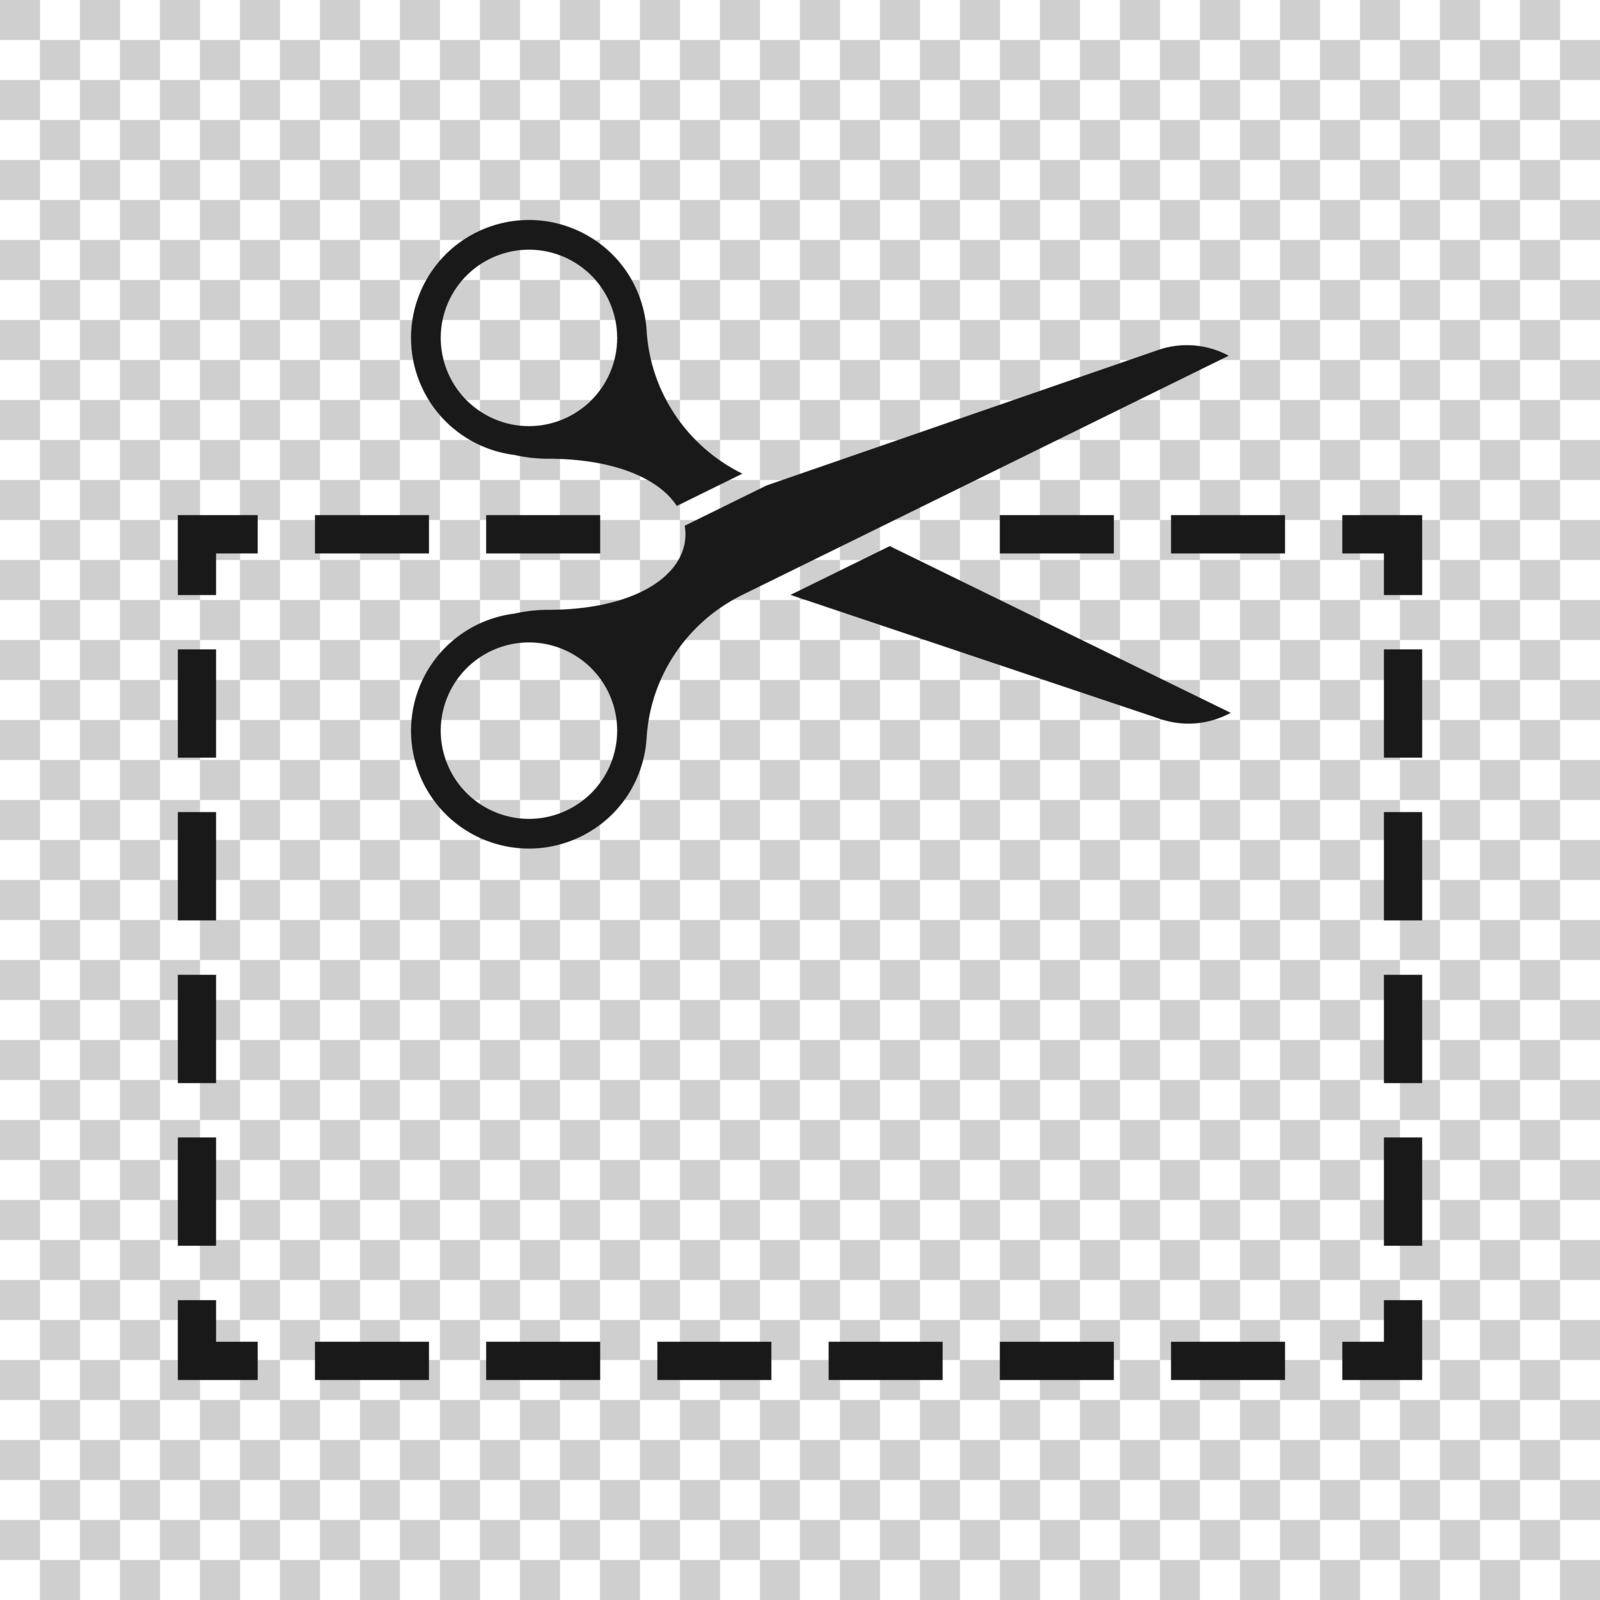 Coupon cut lines icon in flat style. Scissors snip sign vector illustration on white isolated background. Sale sticker business concept.